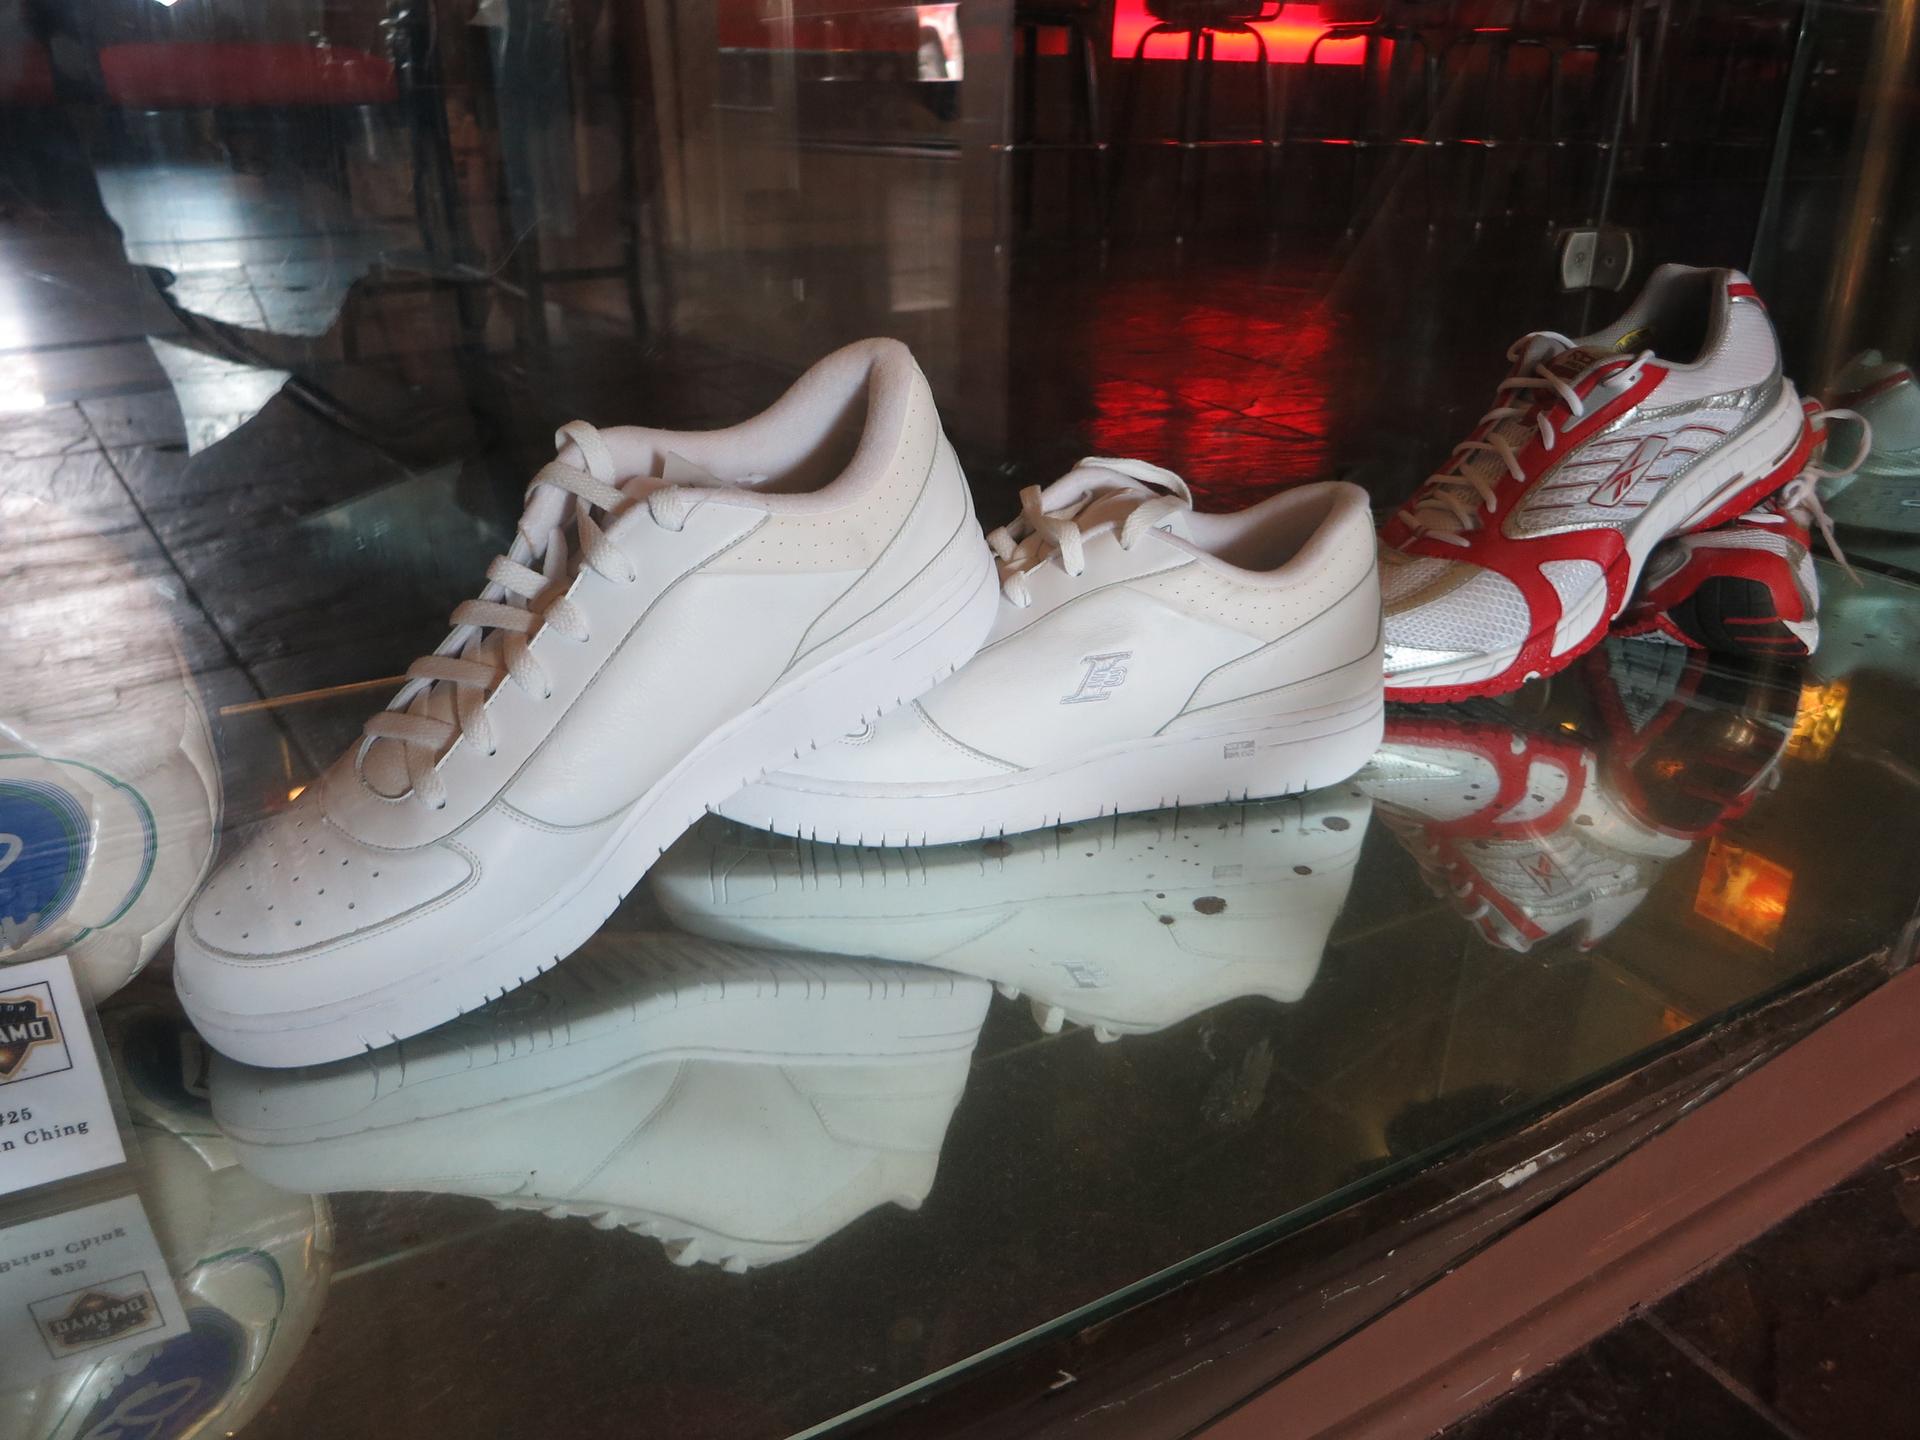 Yao Ming's size 17 shoes are on display at a Houston restaurant that his family partly owns. 